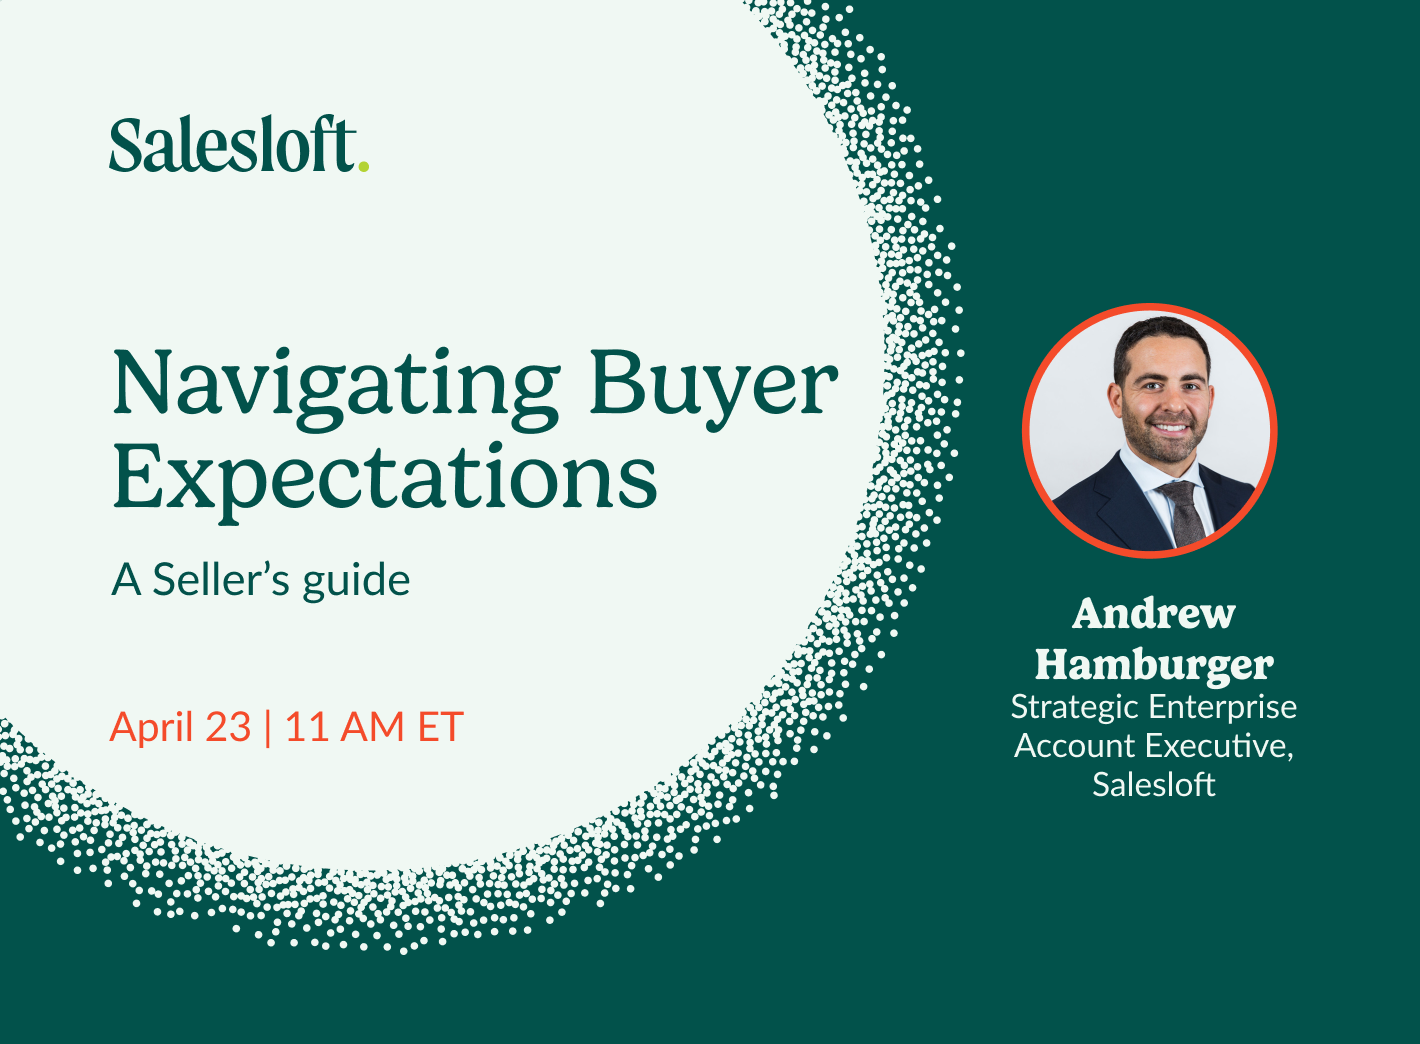 "Navigating Buyer Expectations"